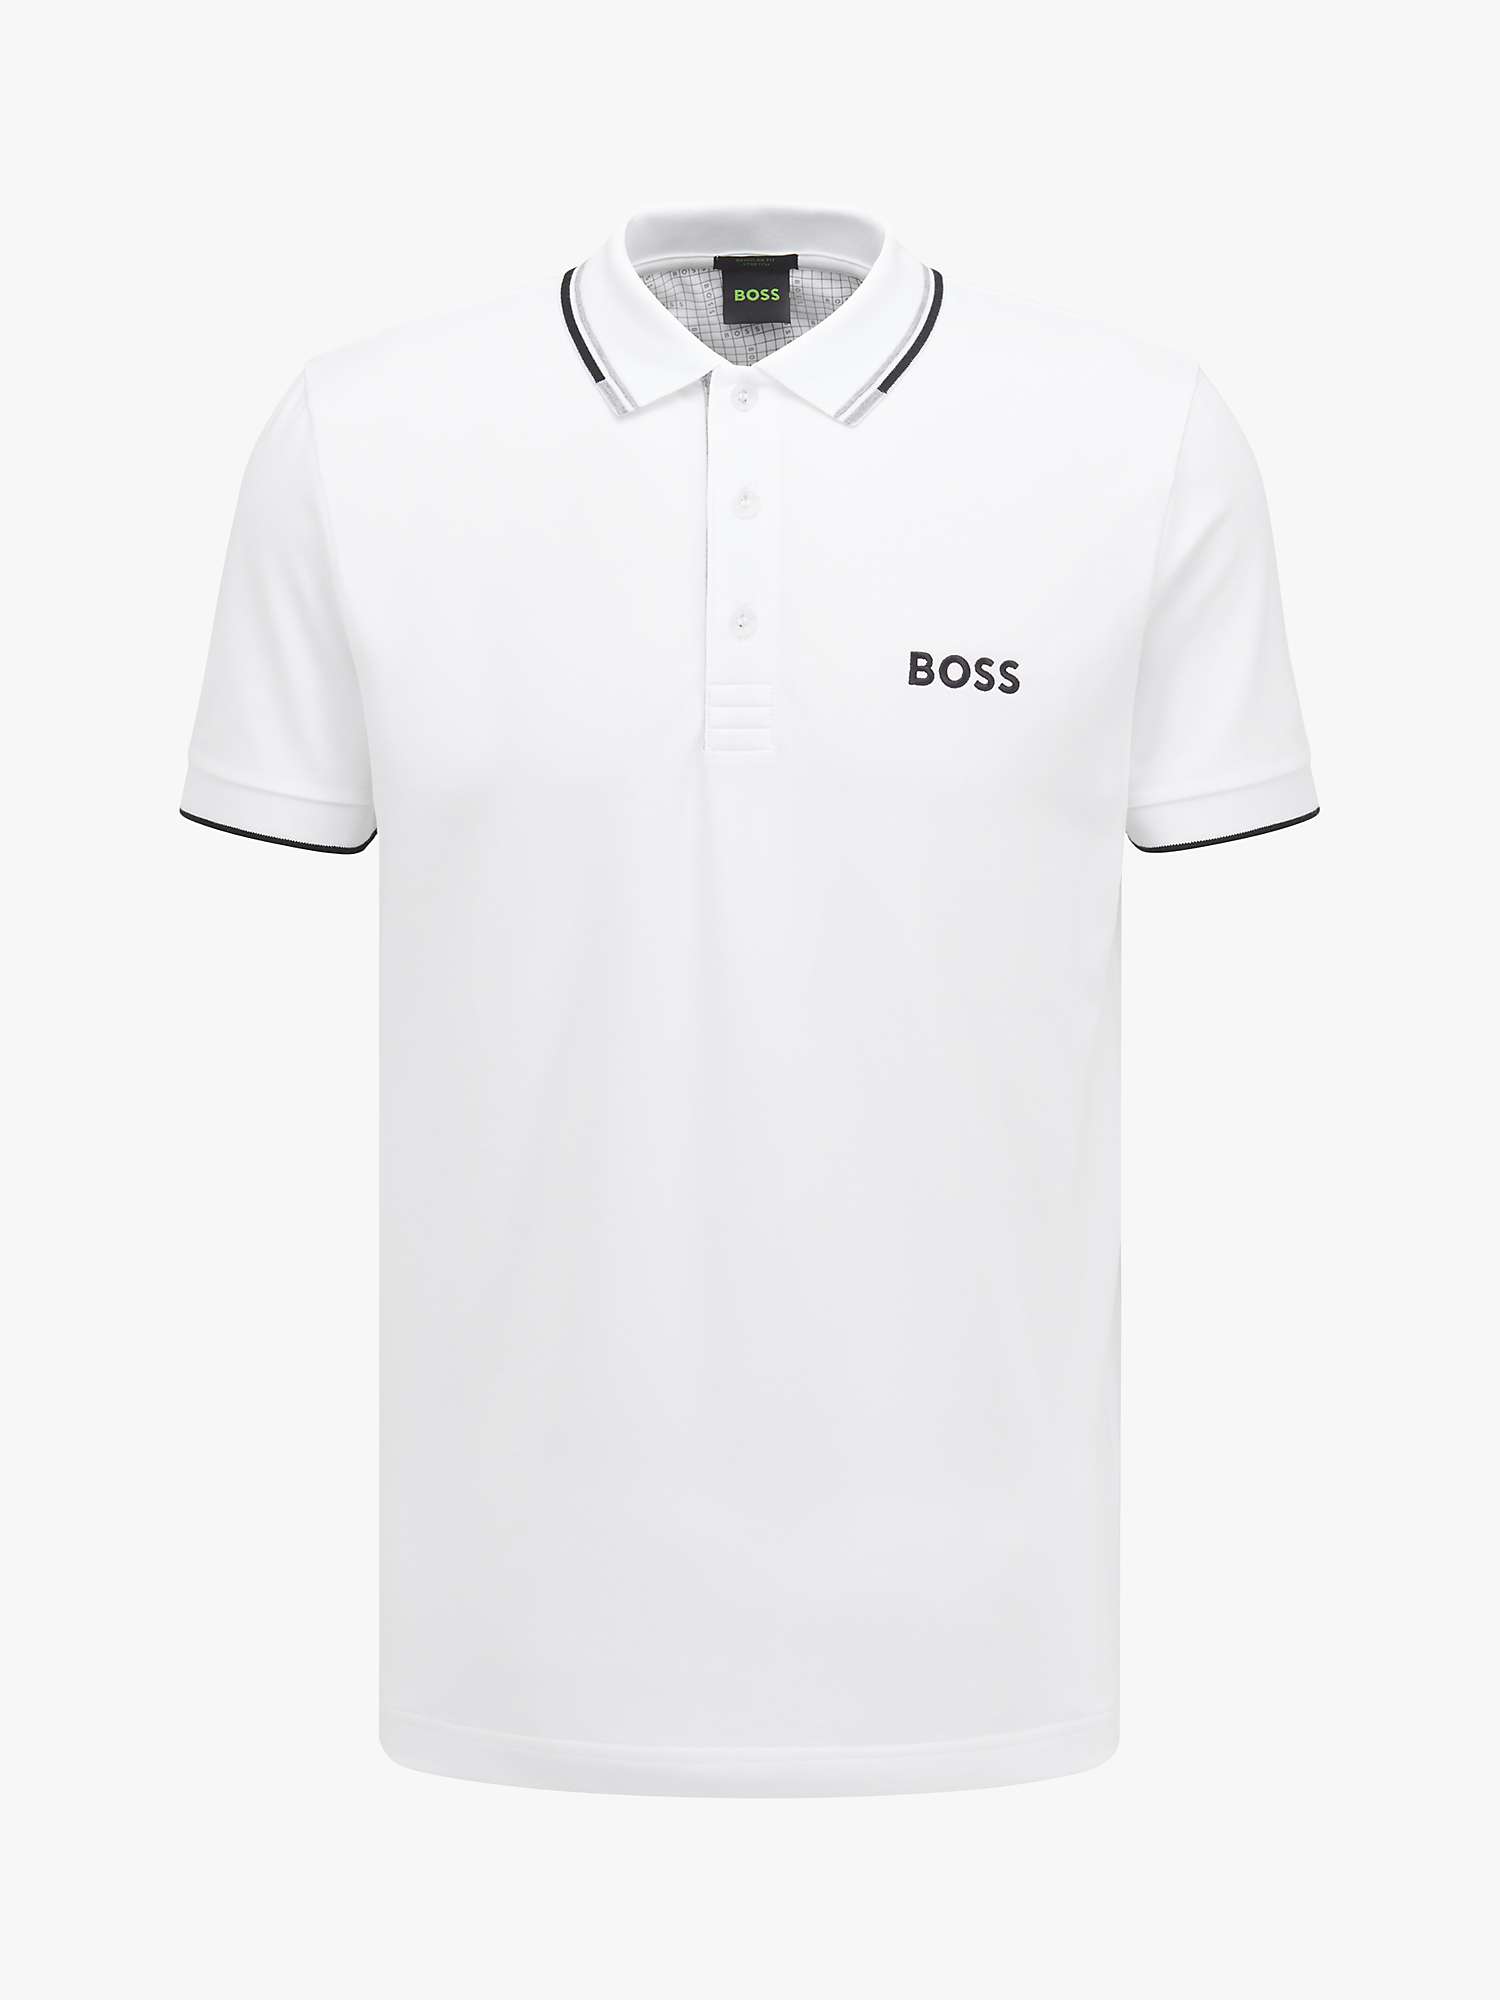 Buy BOSS Paddy Pro Short Sleeve Polo Top Online at johnlewis.com